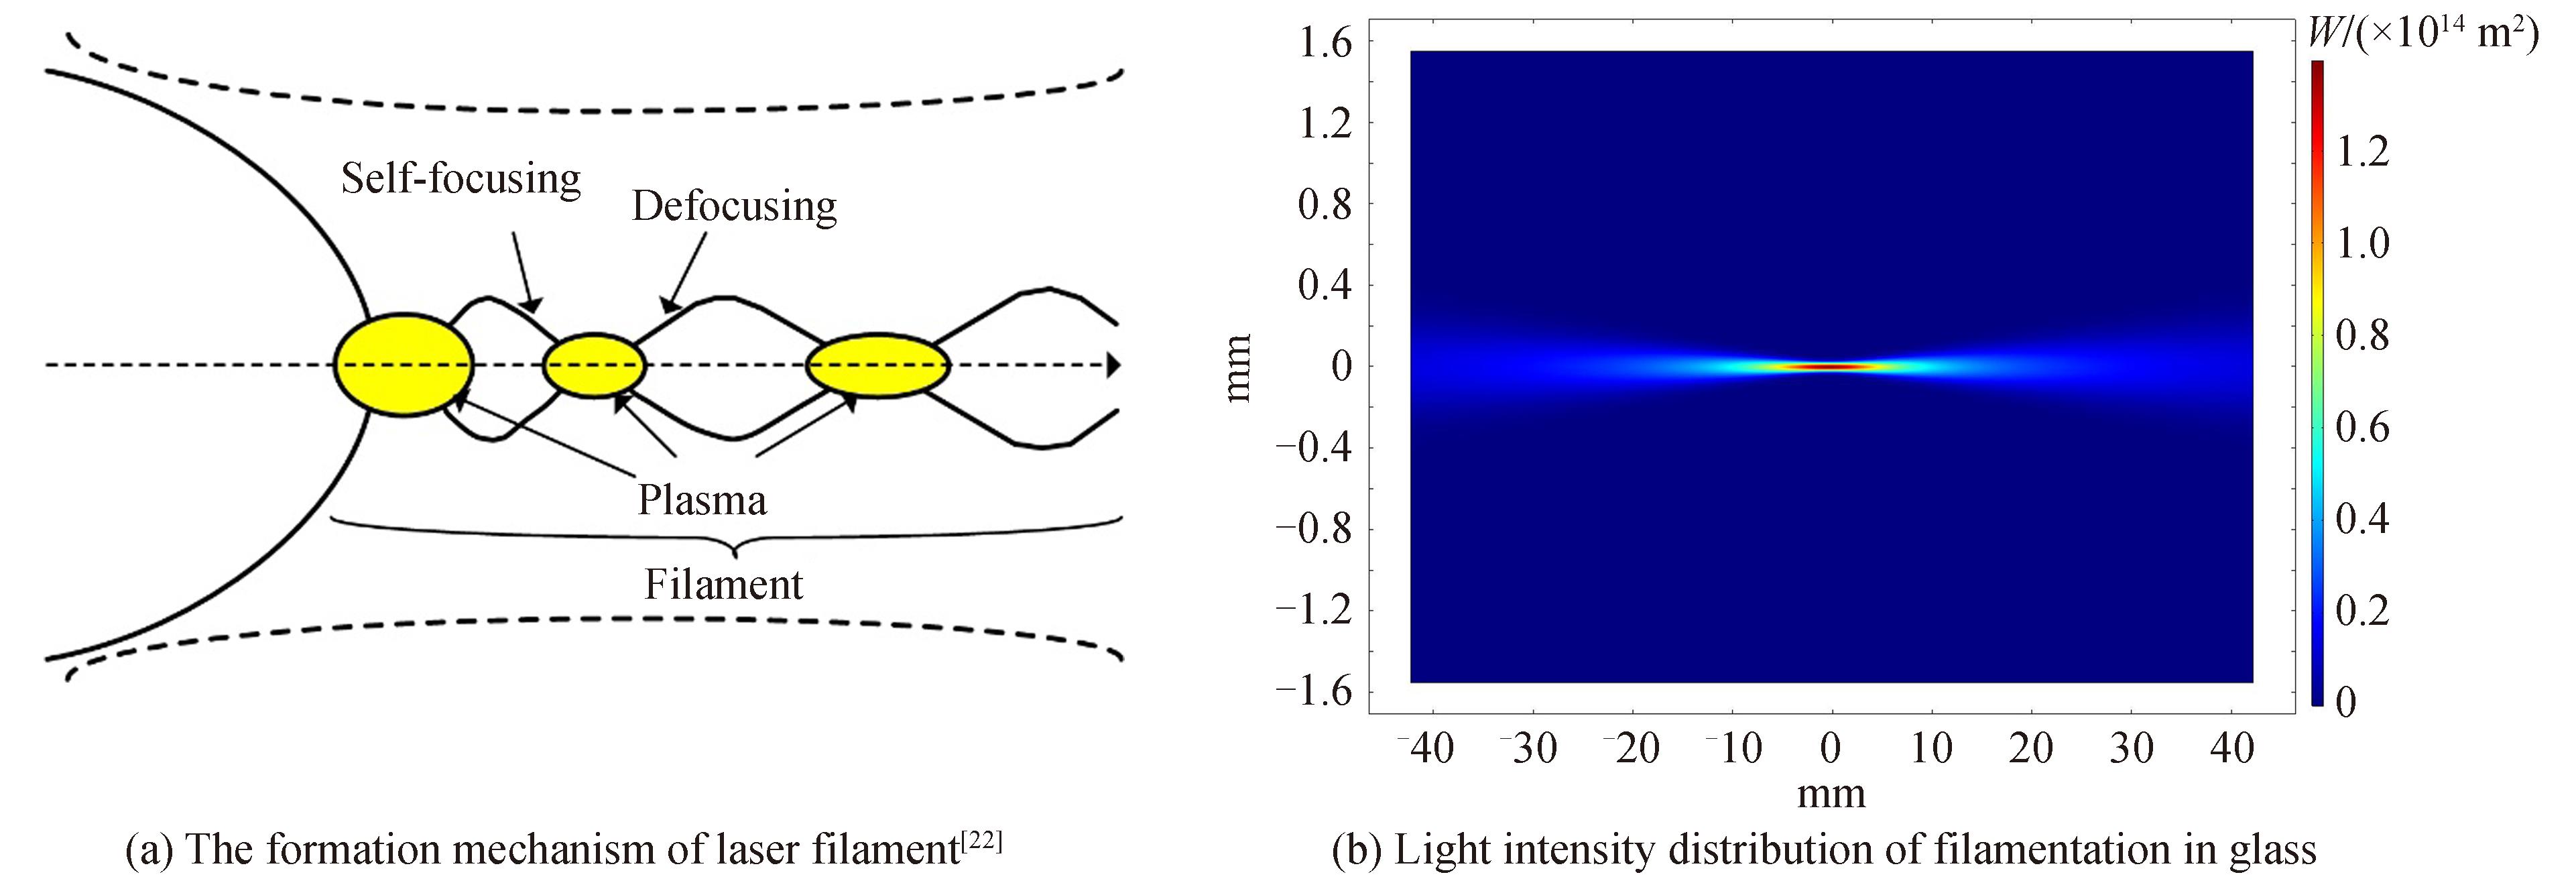 Filamentation formation mechanism and light intensity distribution in glass